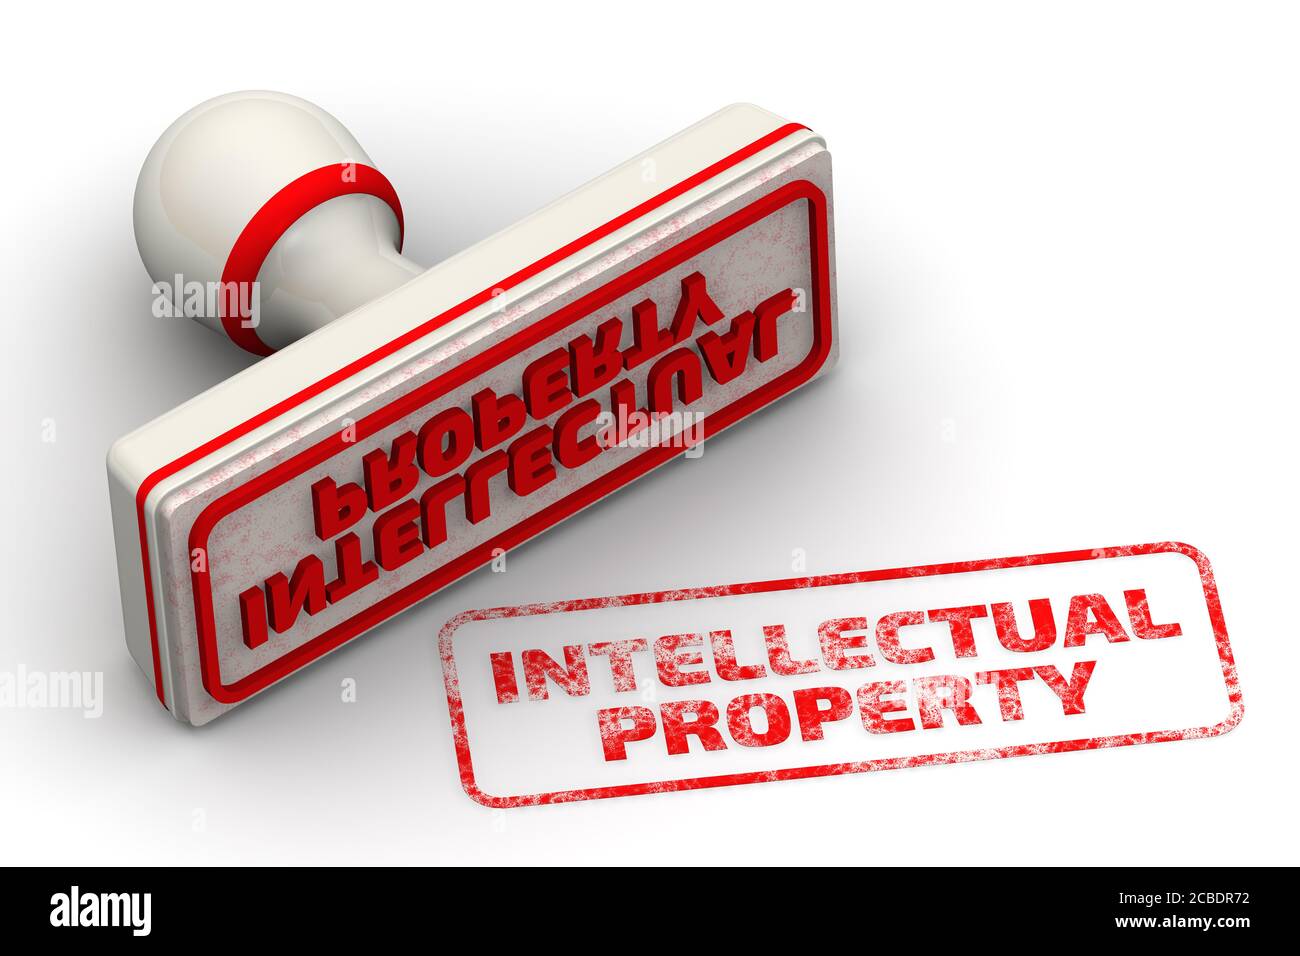 Intellectual property. The seal and imprint. White seal and red imprint INTELLECTUAL PROPERTY on white surface. 3D illustration Stock Photo